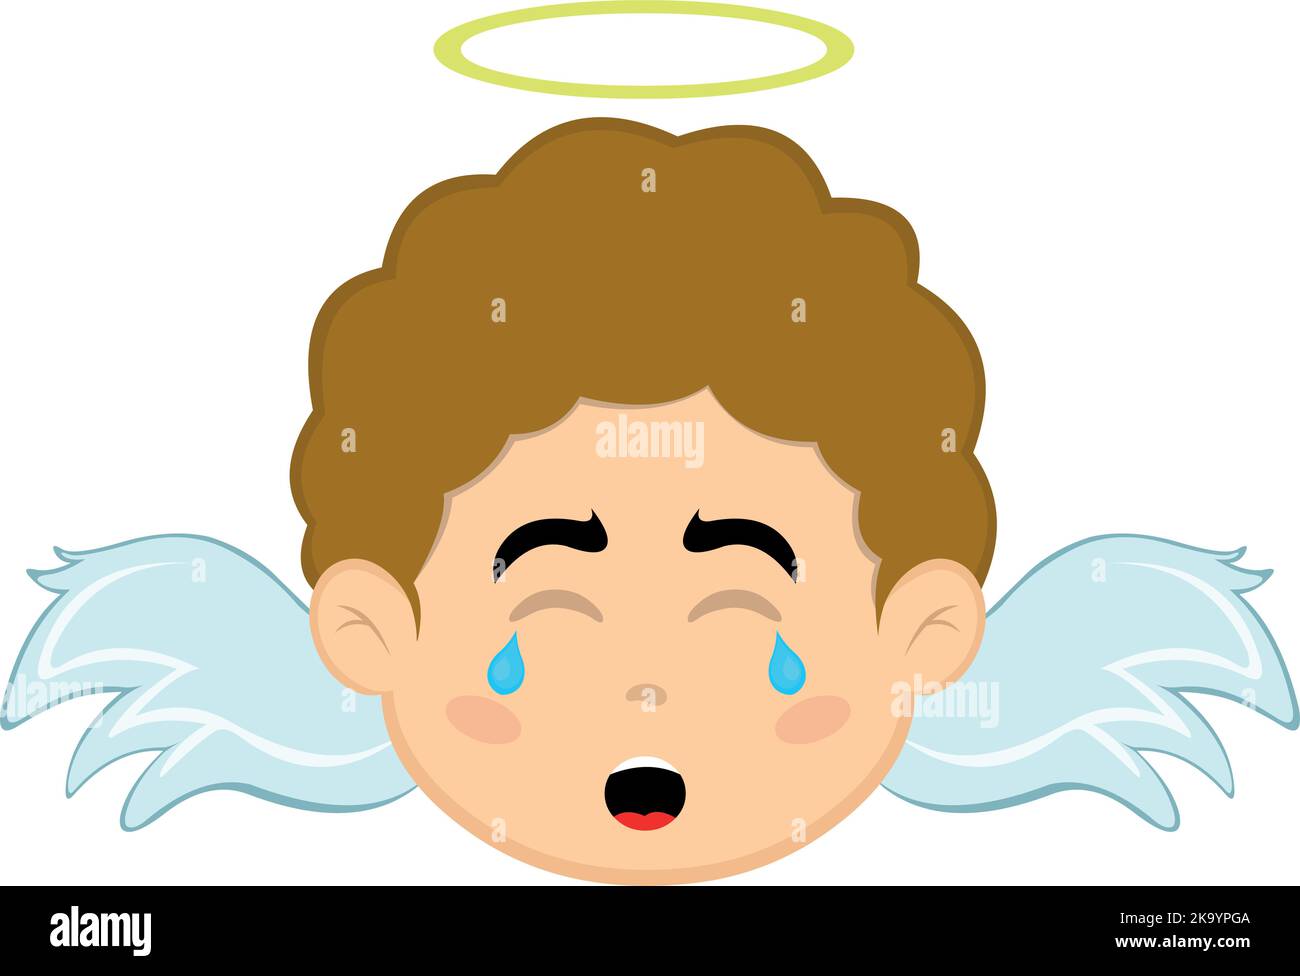 Vector illustration of the face of a cartoon angel boy with a sad expression, crying with tears in his eyes Stock Vector